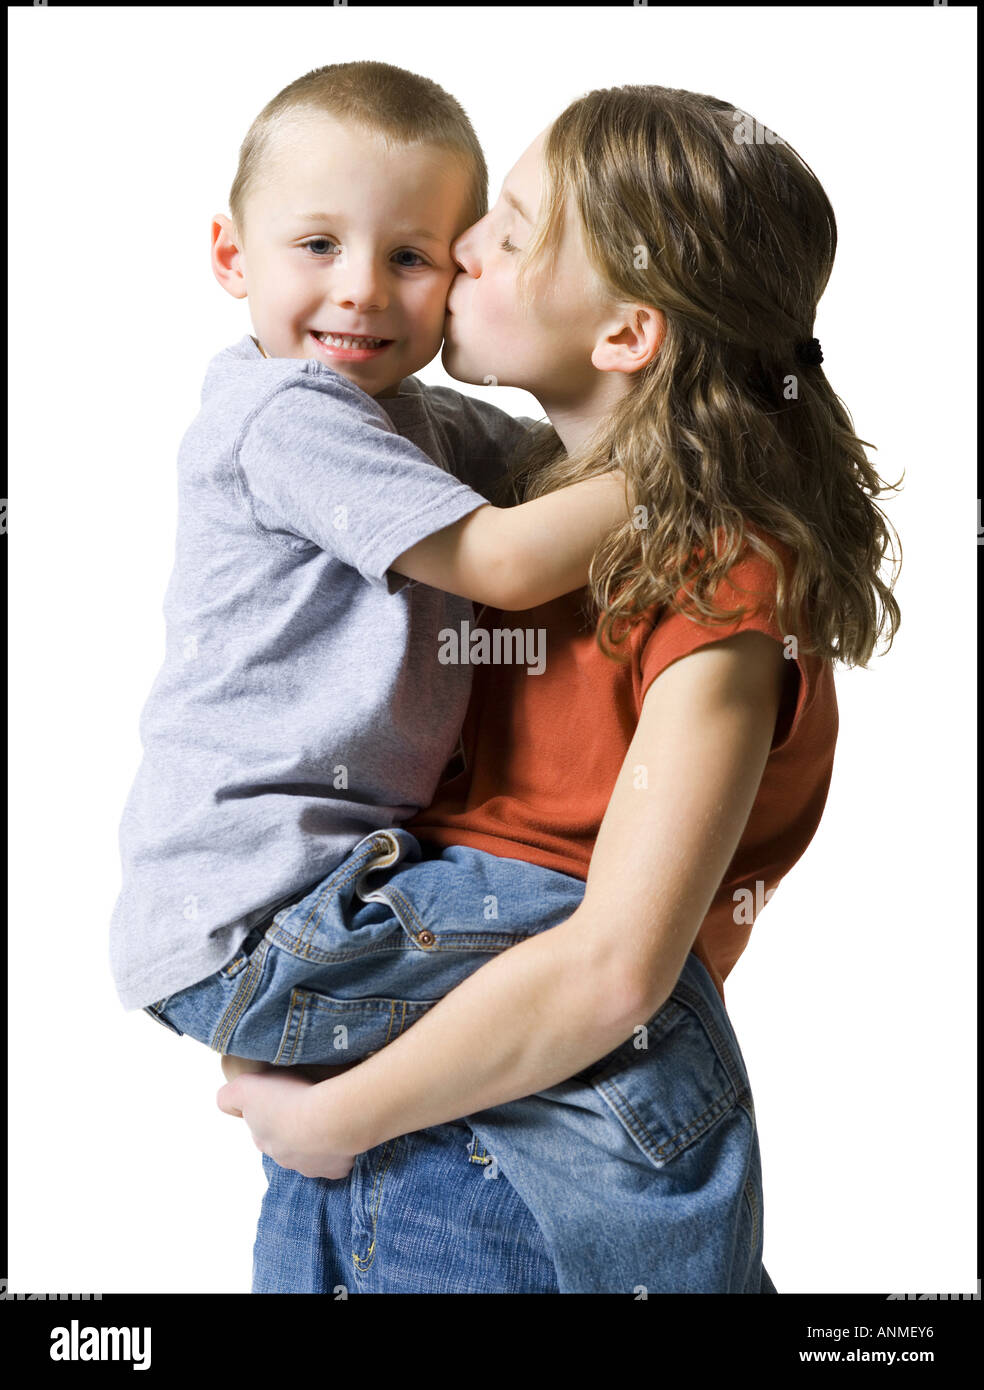 Profile of a sister kissing her brother Stock Photo